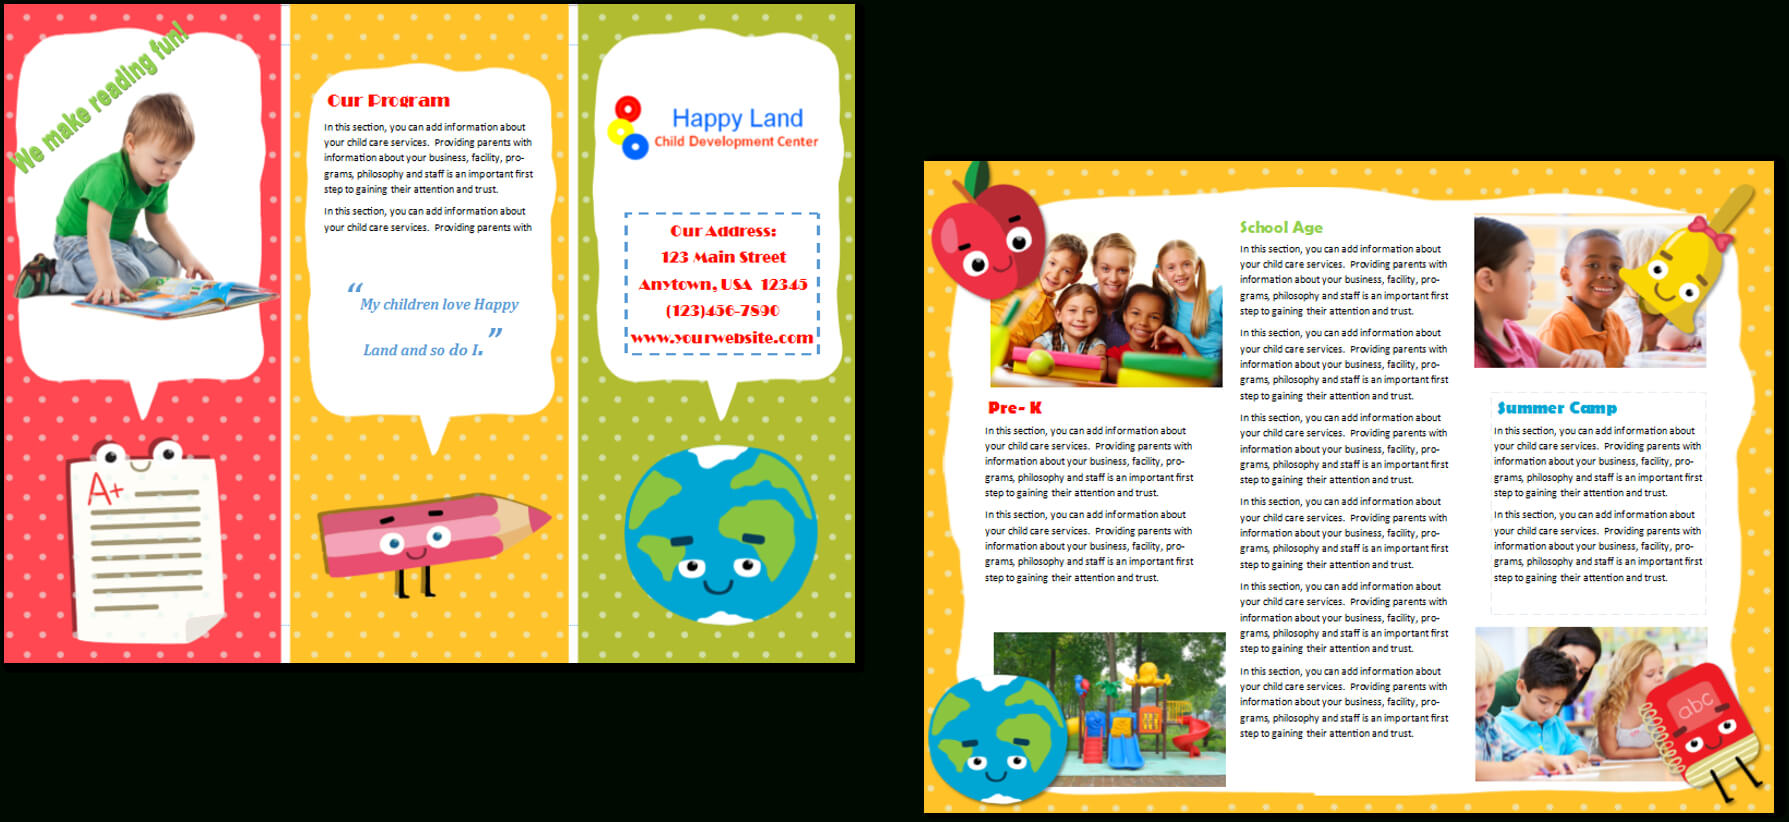 Daycare Template Daycare Lesson Plan Template Info Job Throughout Daycare Brochure Template